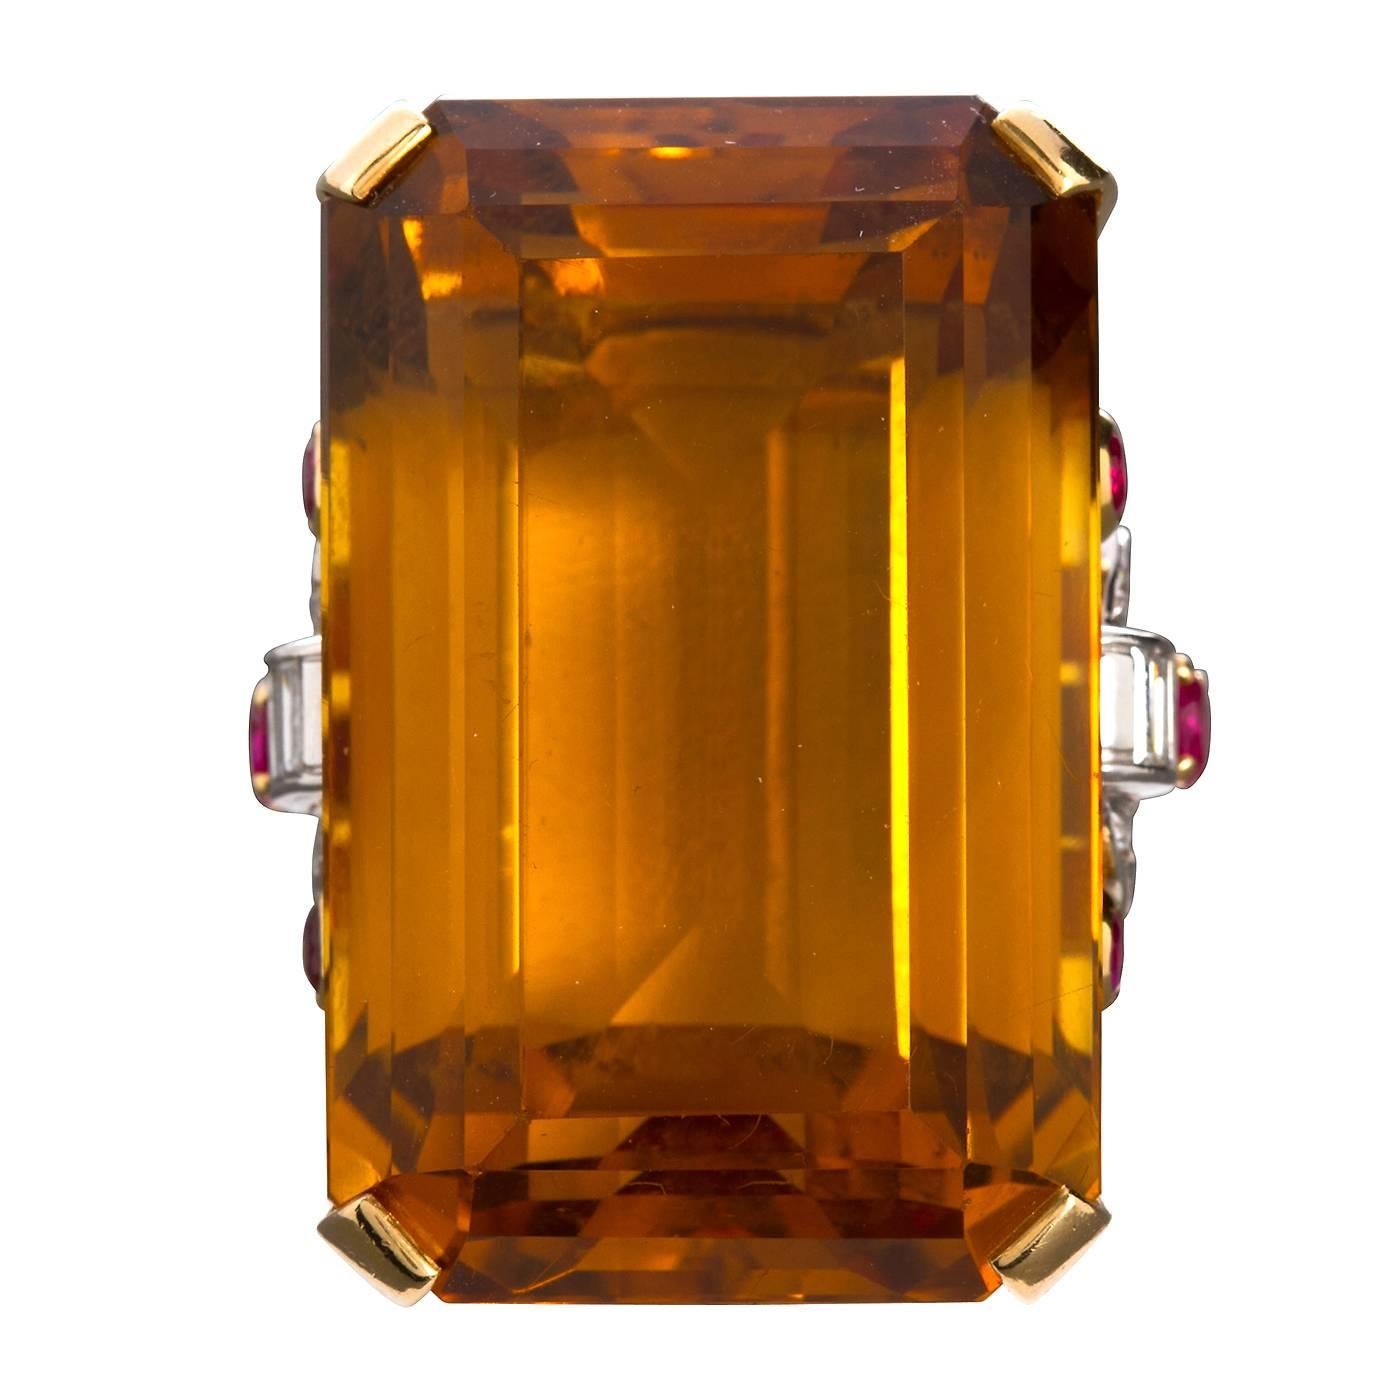 A large approximate 75 carat rectangular step cut citrine mounted in a Retro styled 14 karat yellow and white gold.  Ring gallery set with round brilliant red rubies and baguette diamonds.

Ring sized to fit.

Gem Dimensions: 1-1/2 x 7/8" inch